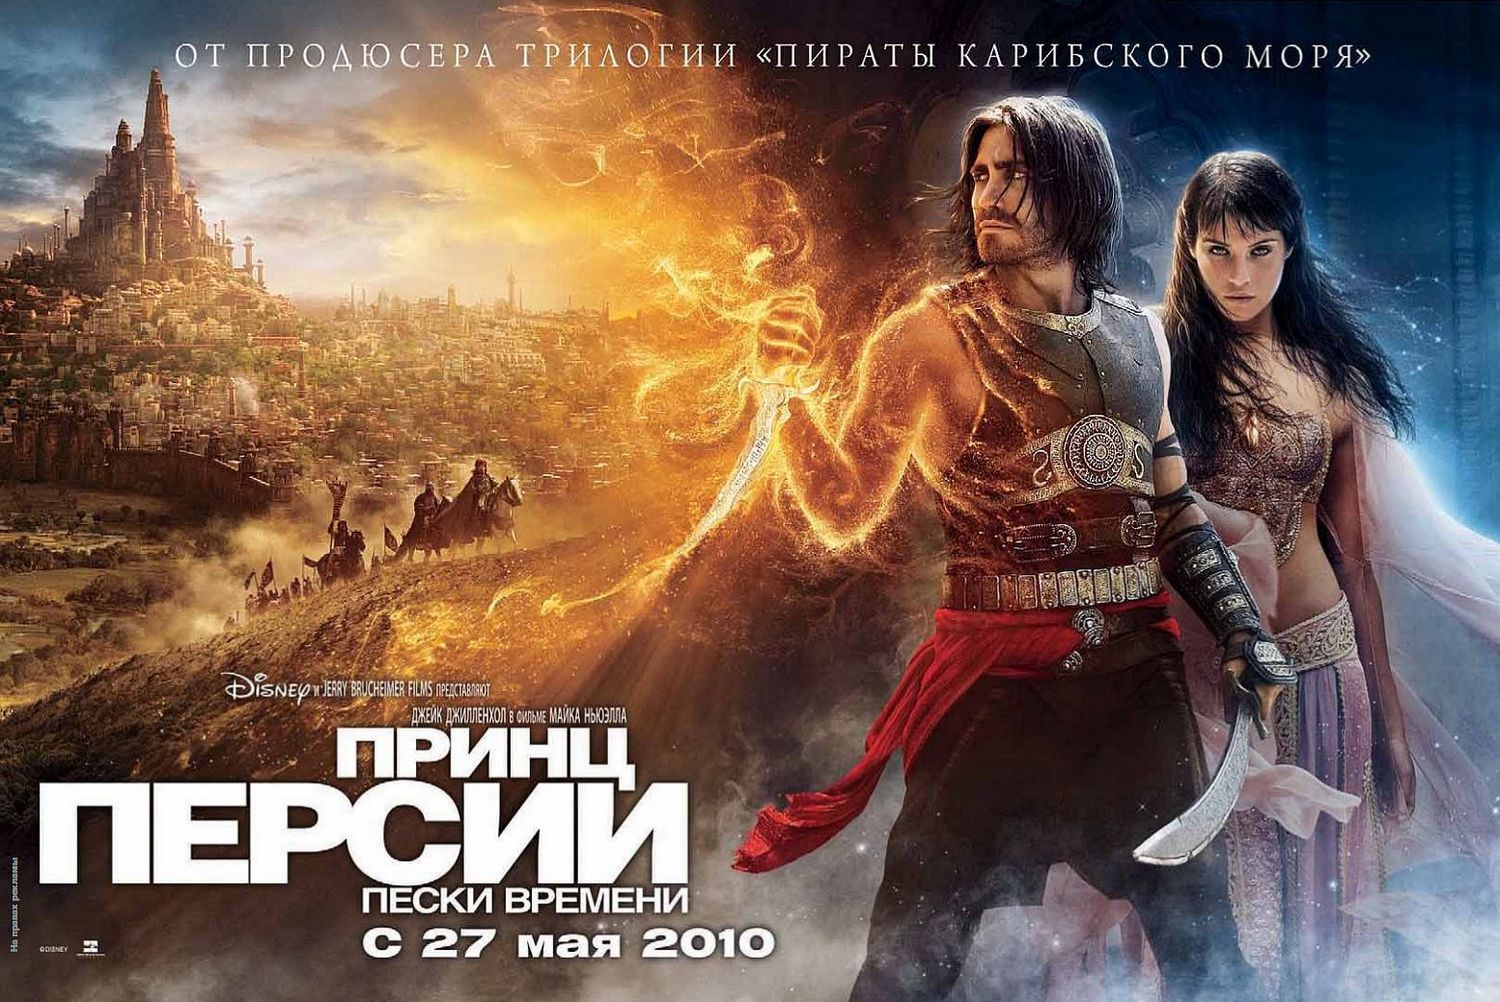 Extra Large Movie Poster Image for Prince of Persia: The Sands of Time (#2 of 10)